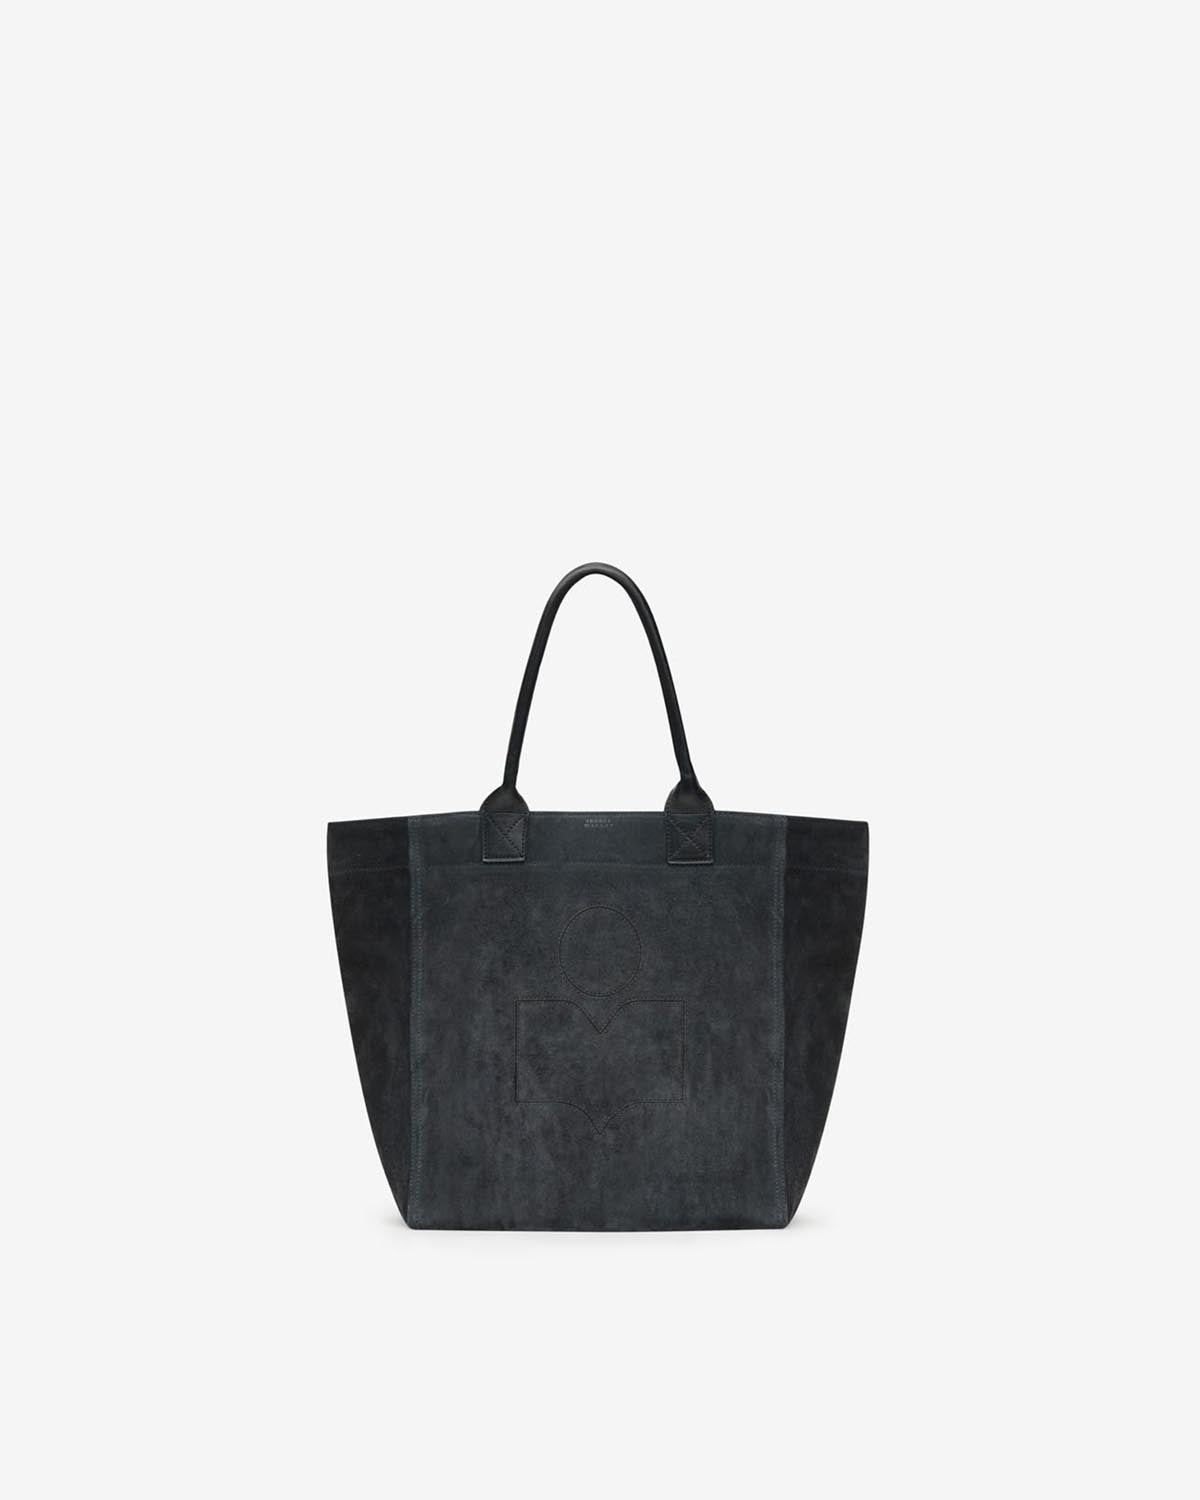 Sac yenky small Woman Anthracite 3